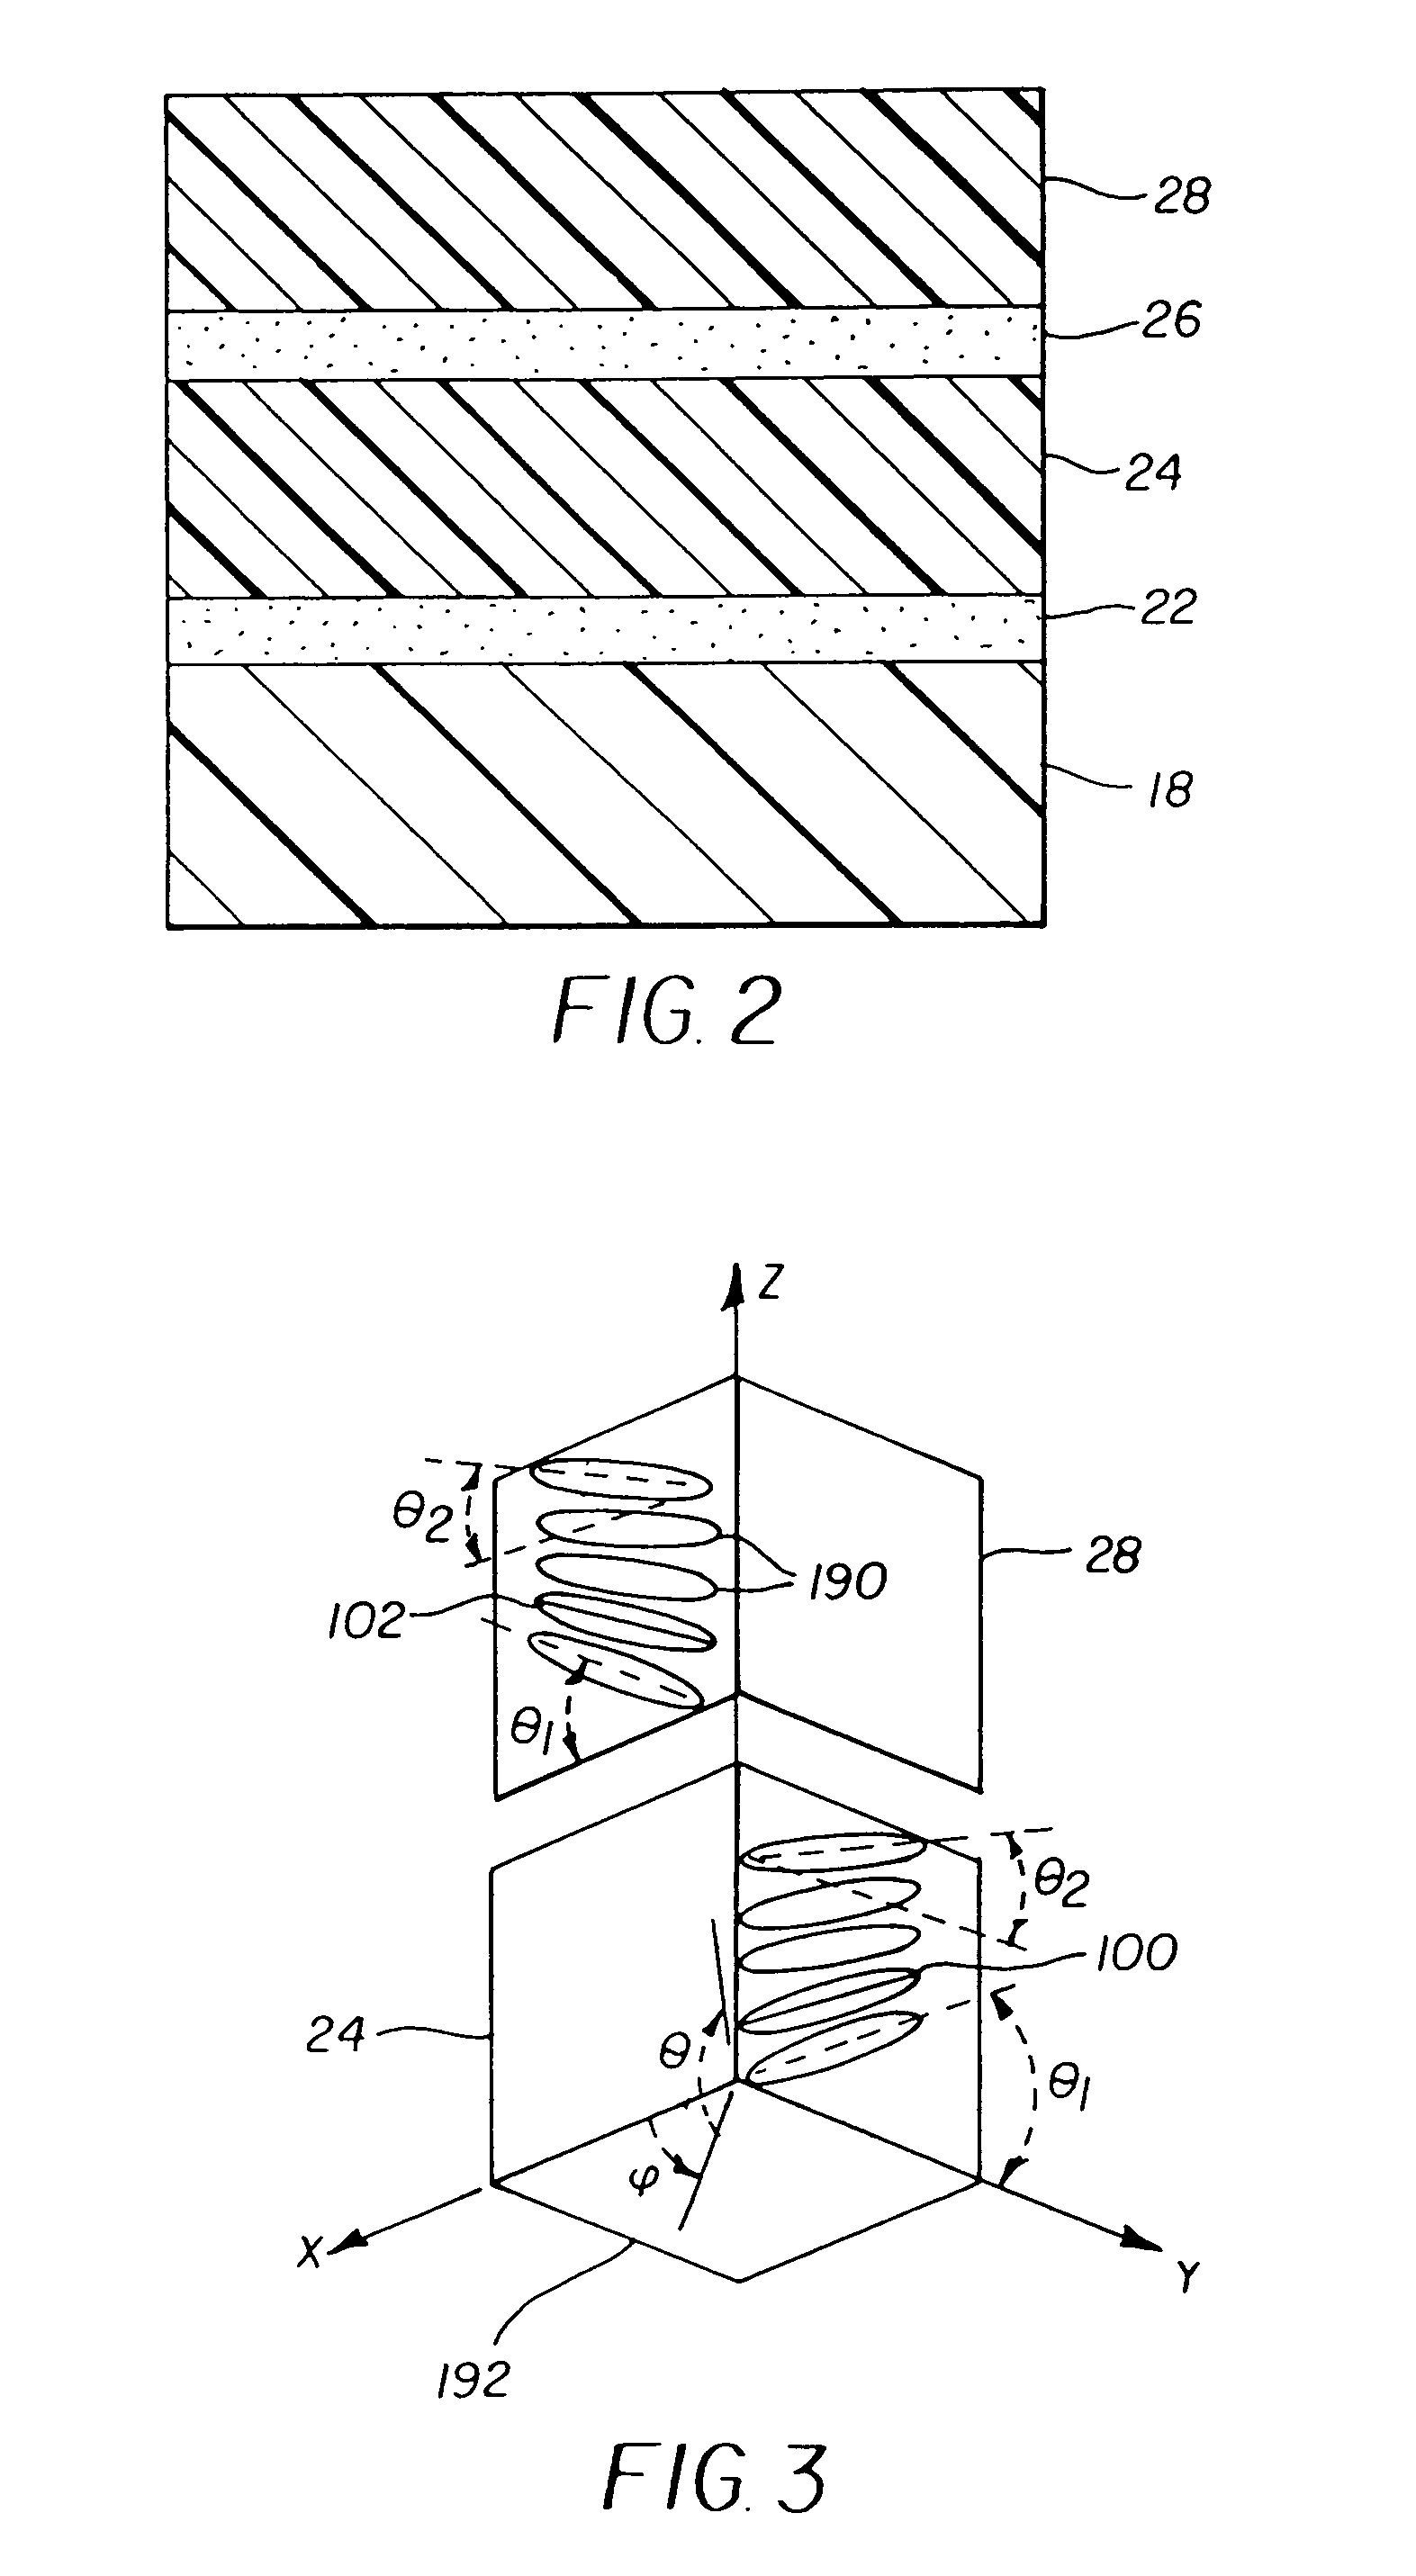 Optical exposure apparatus and method for aligning a substrate